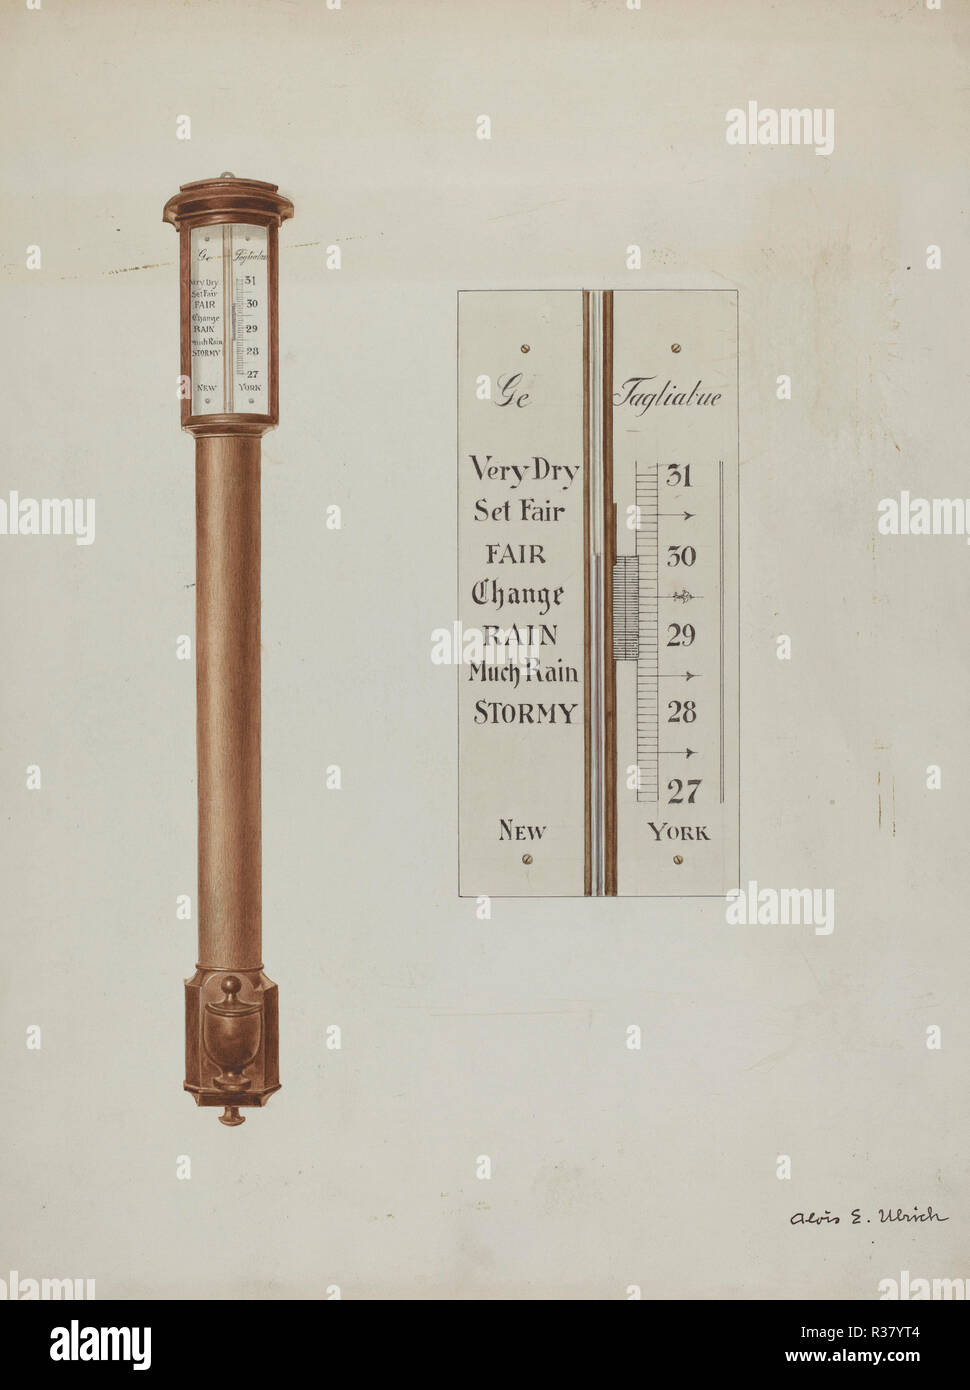 Shaker Barometer. Dated: c. 1937. Dimensions: overall: 35.4 x 27 cm (13 15/16 x 10 5/8 in.)  Original IAD Object: 40 1/2" high; 4 1/8" wide. Medium: watercolor, pen and ink, and graphite on paper. Museum: National Gallery of Art, Washington DC. Author: Alois E. Ulrich. Stock Photo